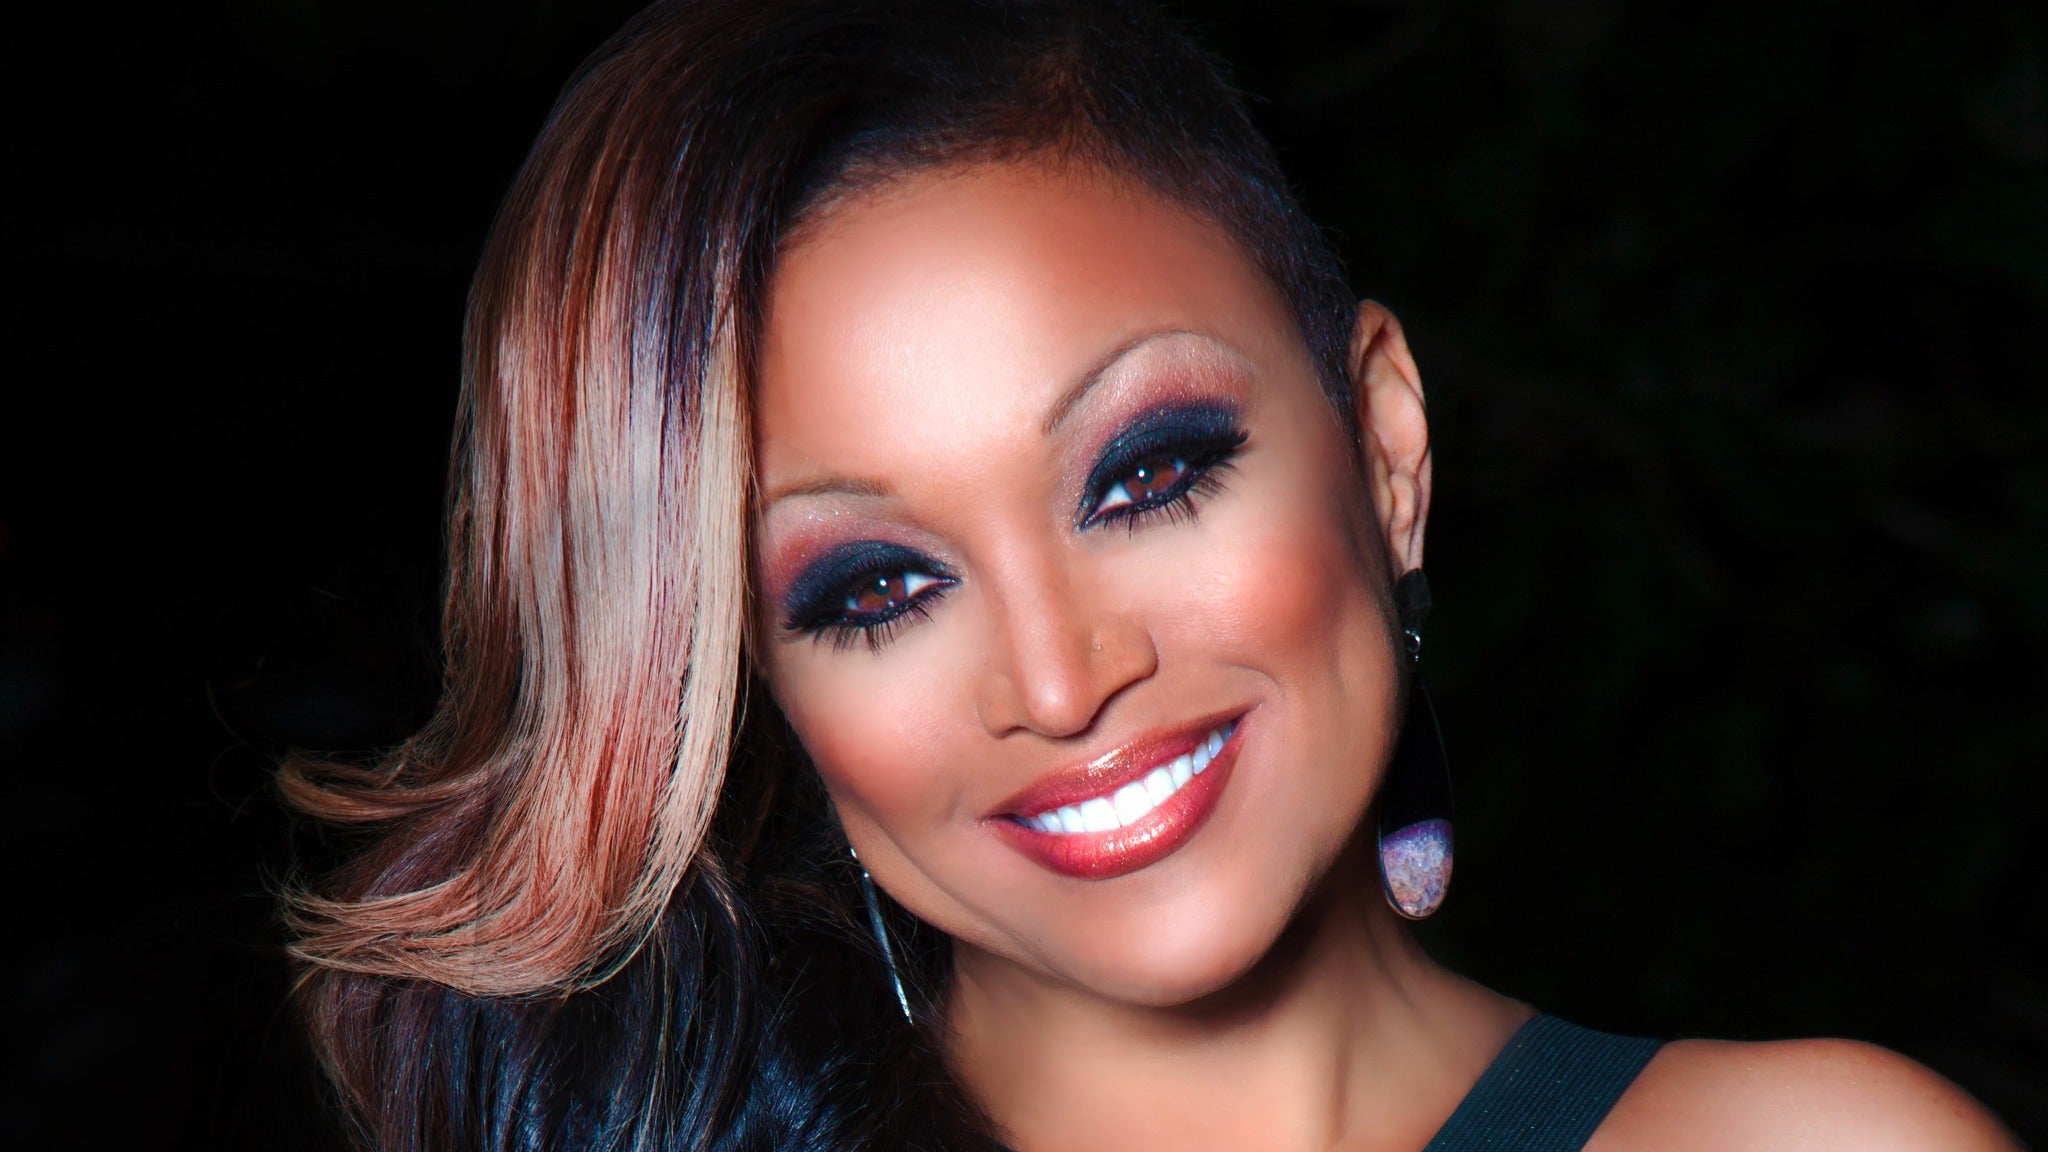 how old is chante moore